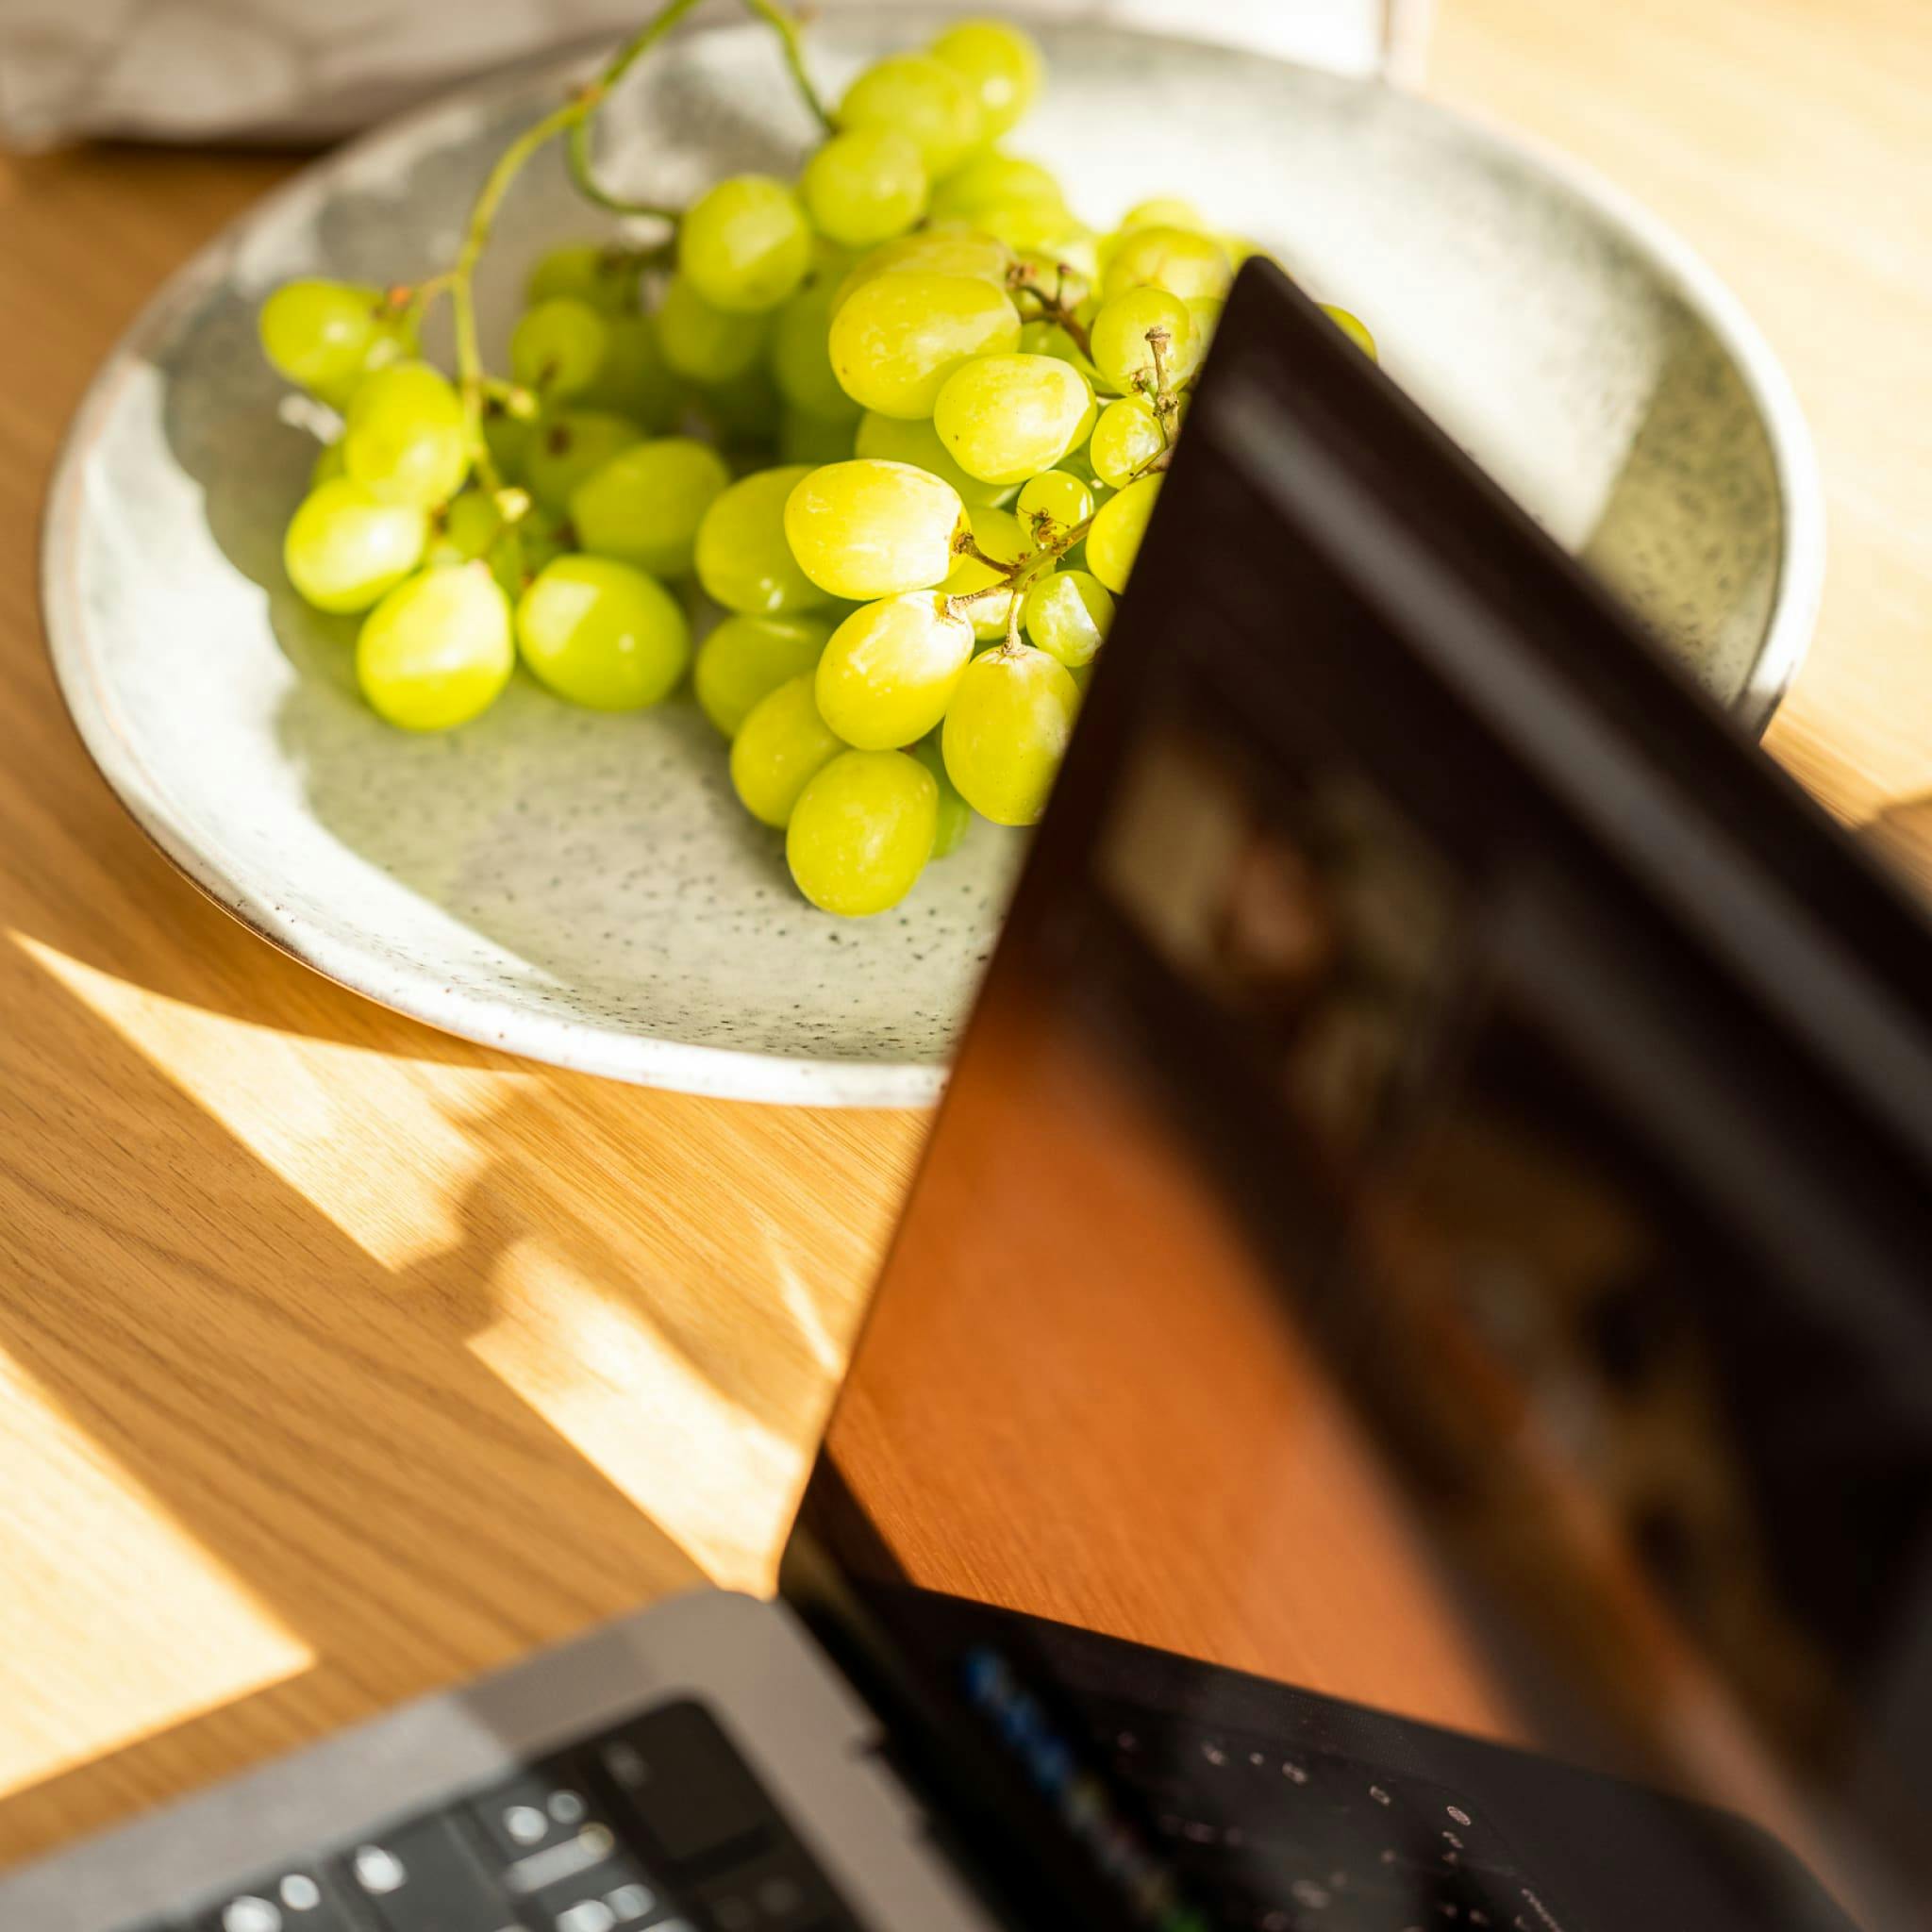 A plate of grapes next to an open laptop on a sunlit wooden table.